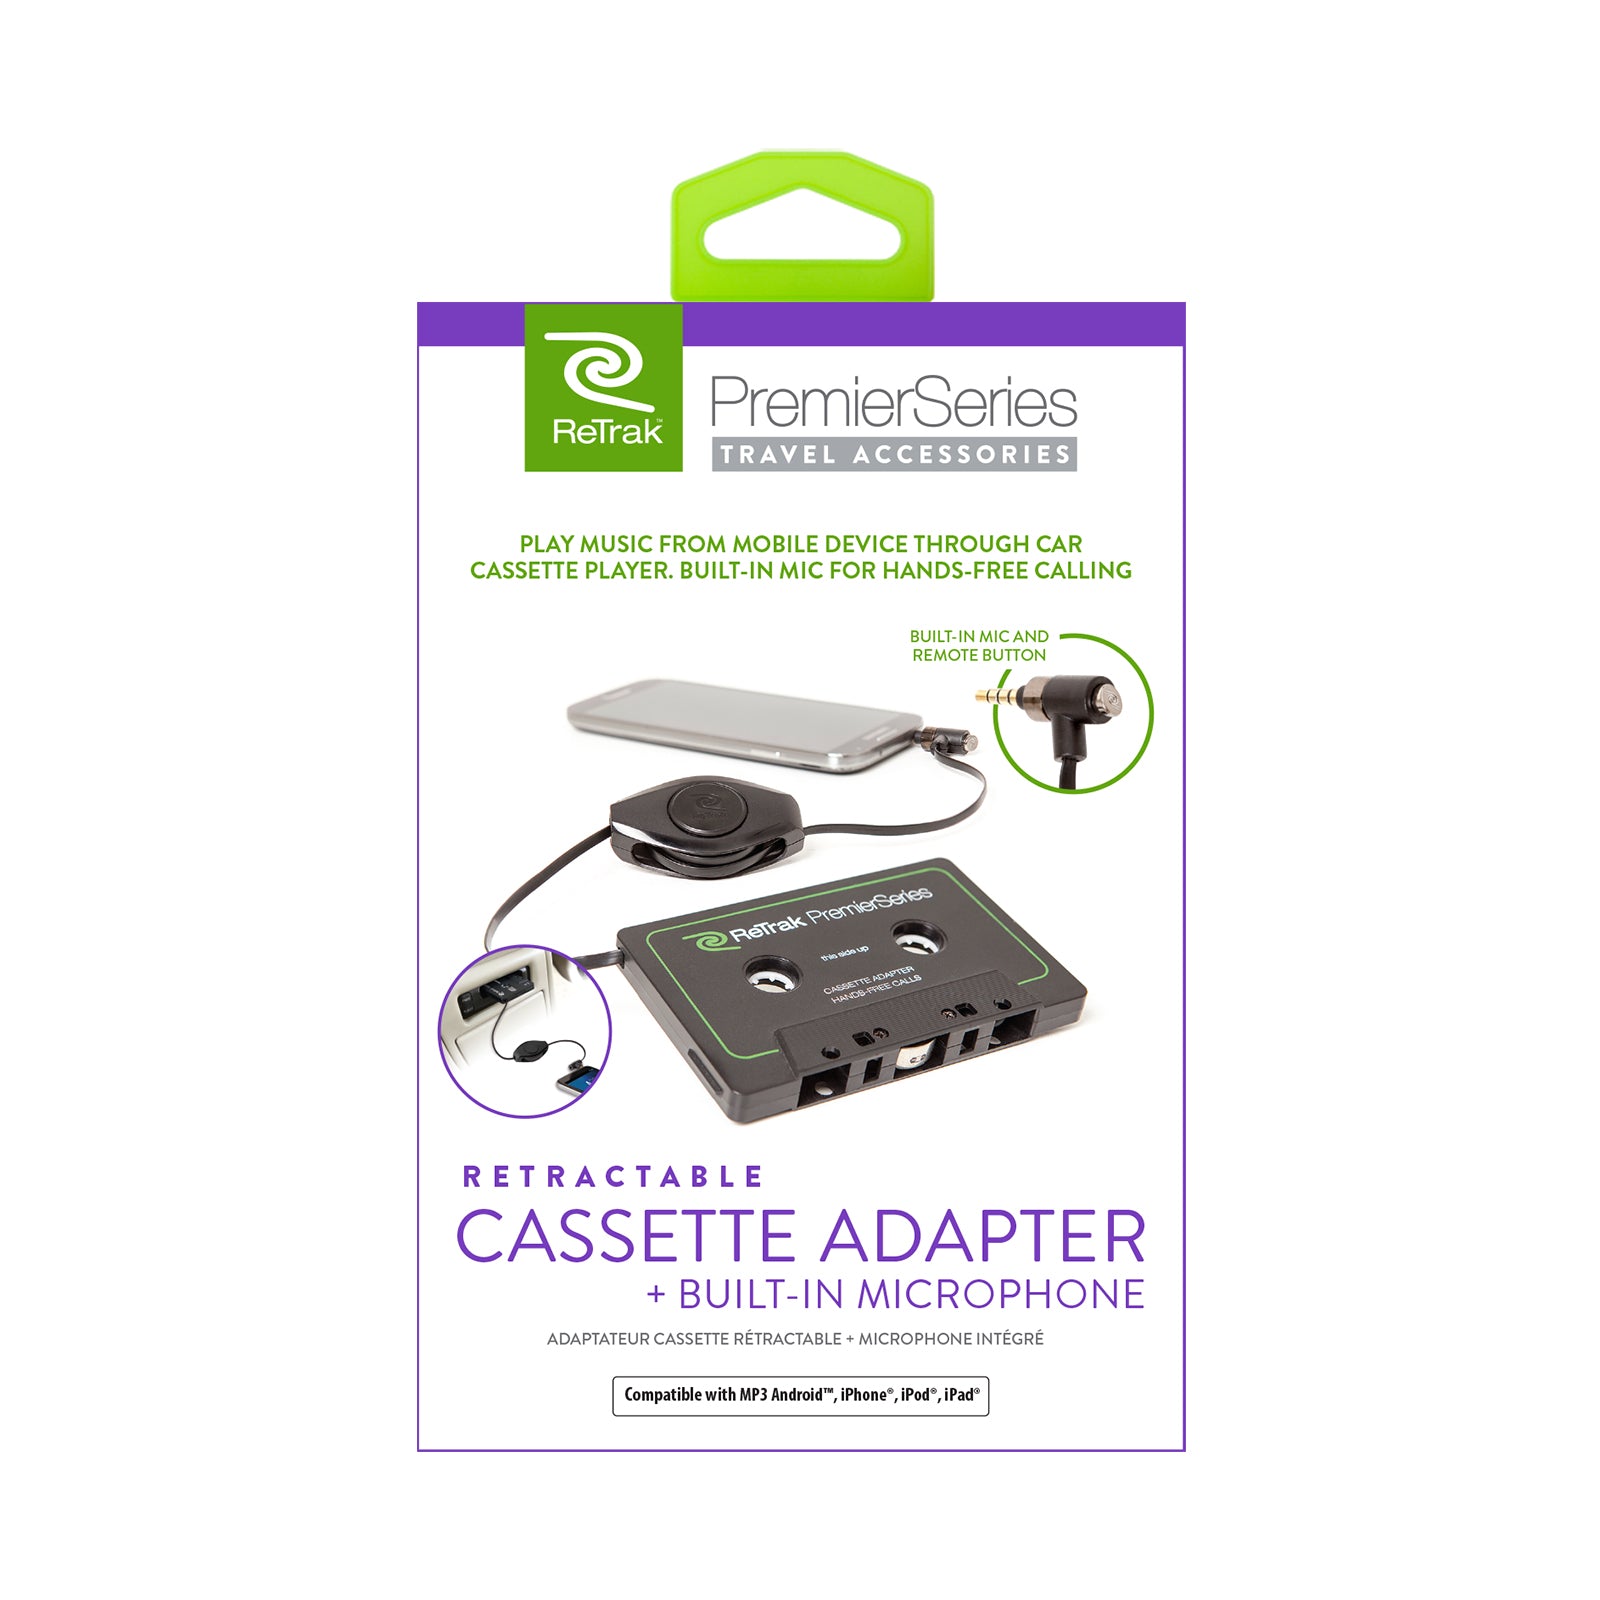 Premier Cassette Adapter with Hands-free Mic